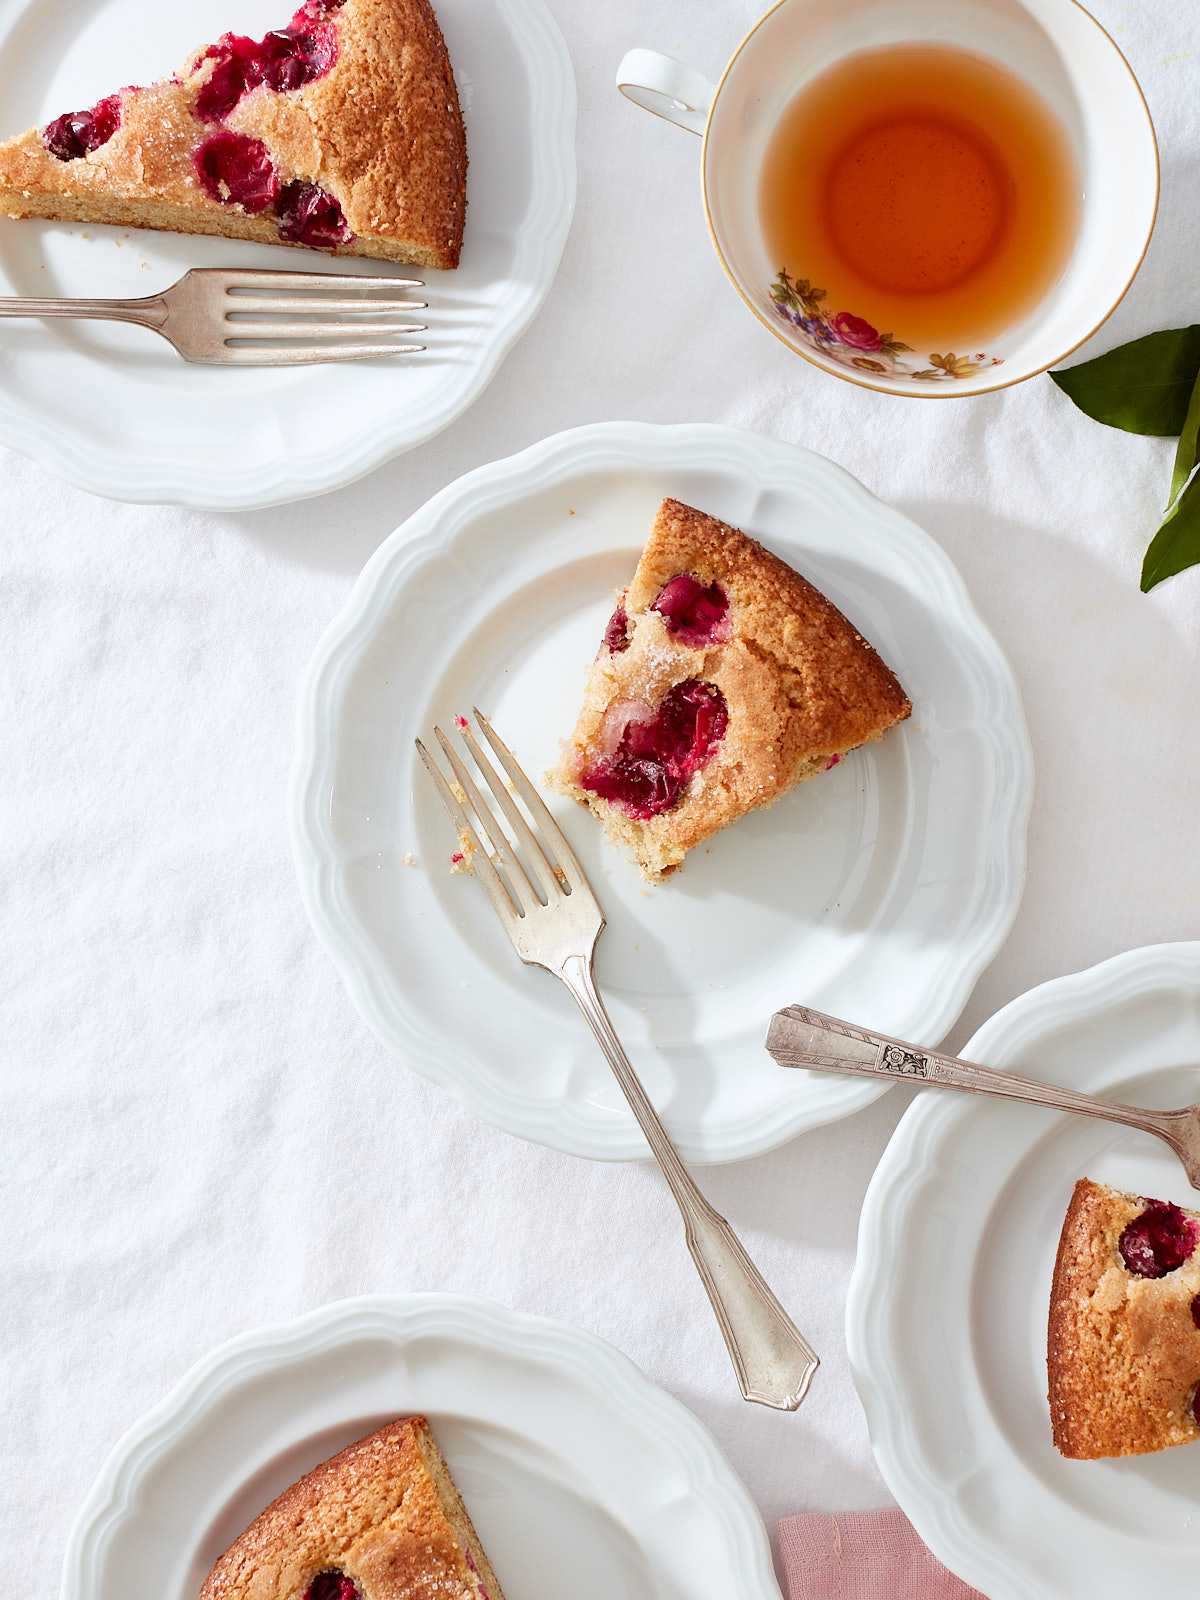 Citrus and Cranberry Buttermilk Cake | Slices of cranberry cake on white porcelain dessert plates with vintage forks, pink linen, tea, and fresh tangerines.